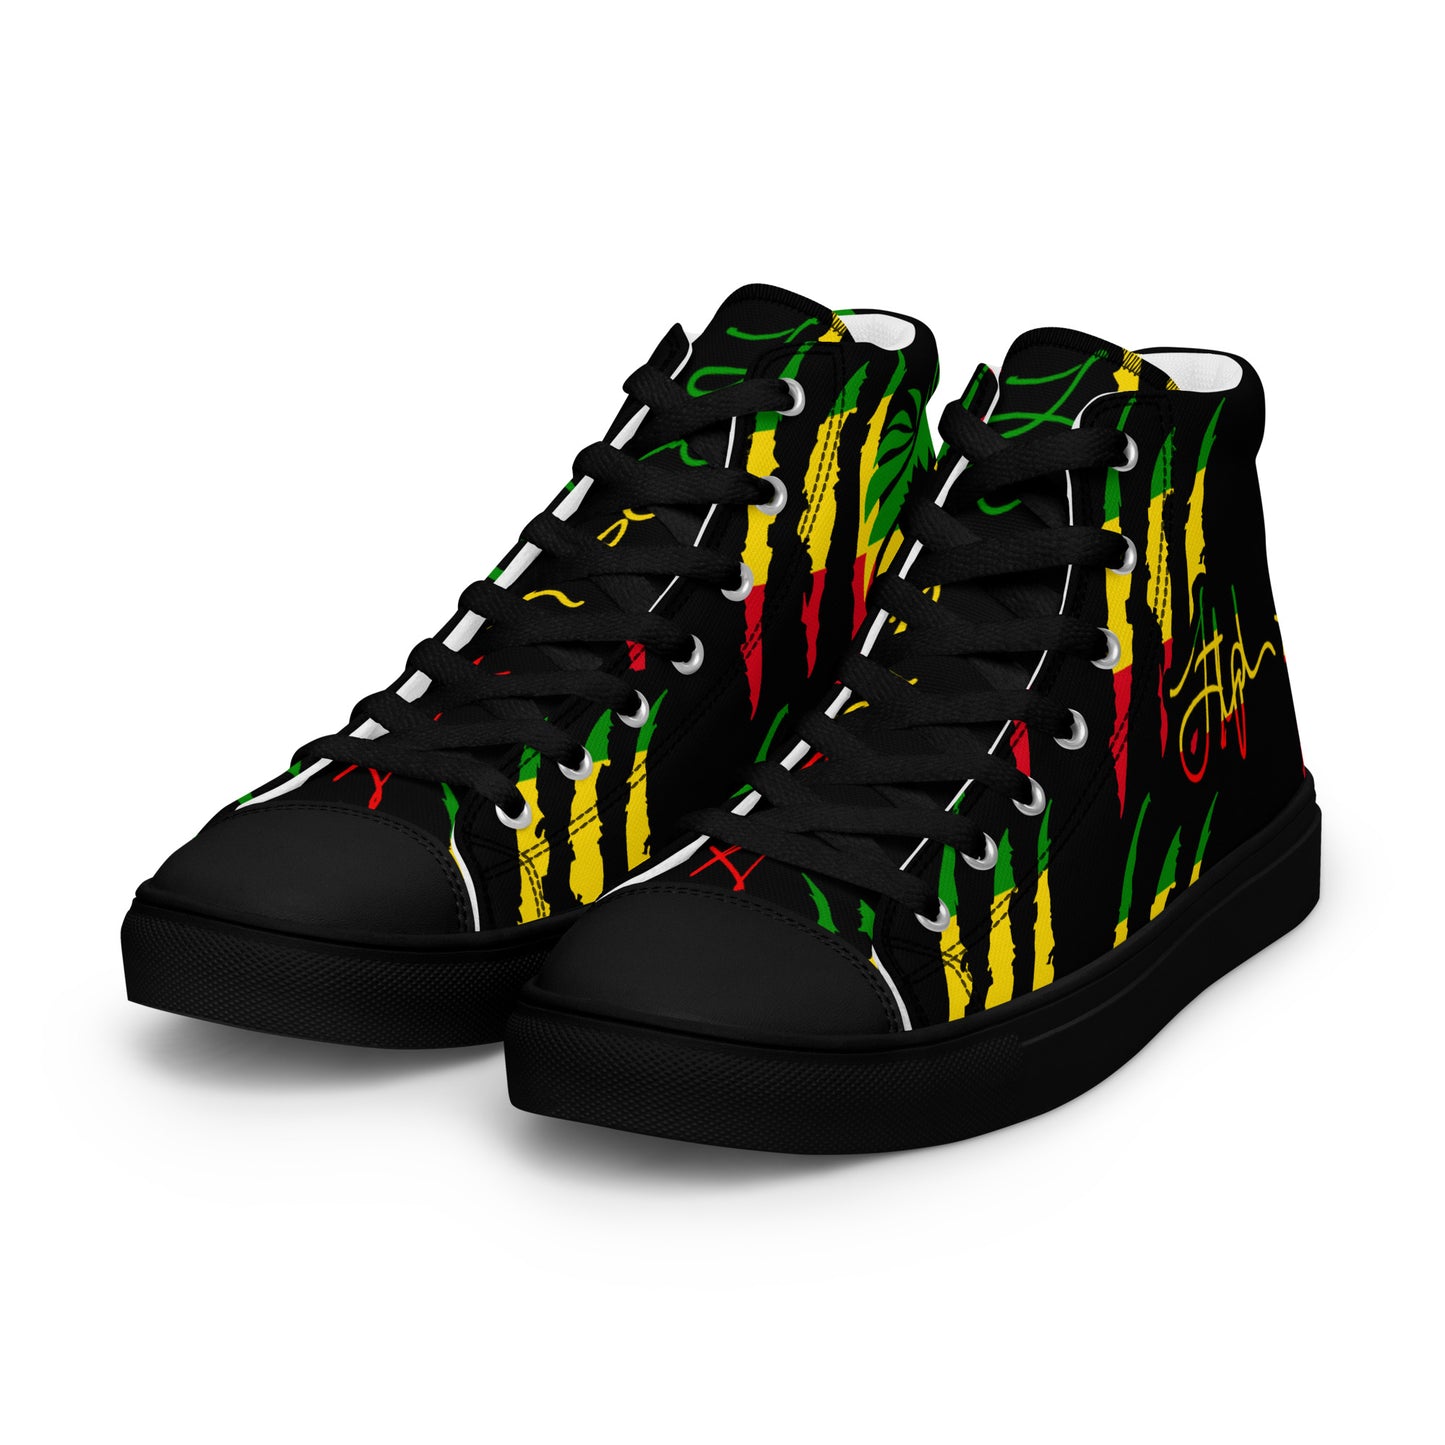 Red Gold and Green Women’s high top Signature shoes by Iamstephenallen